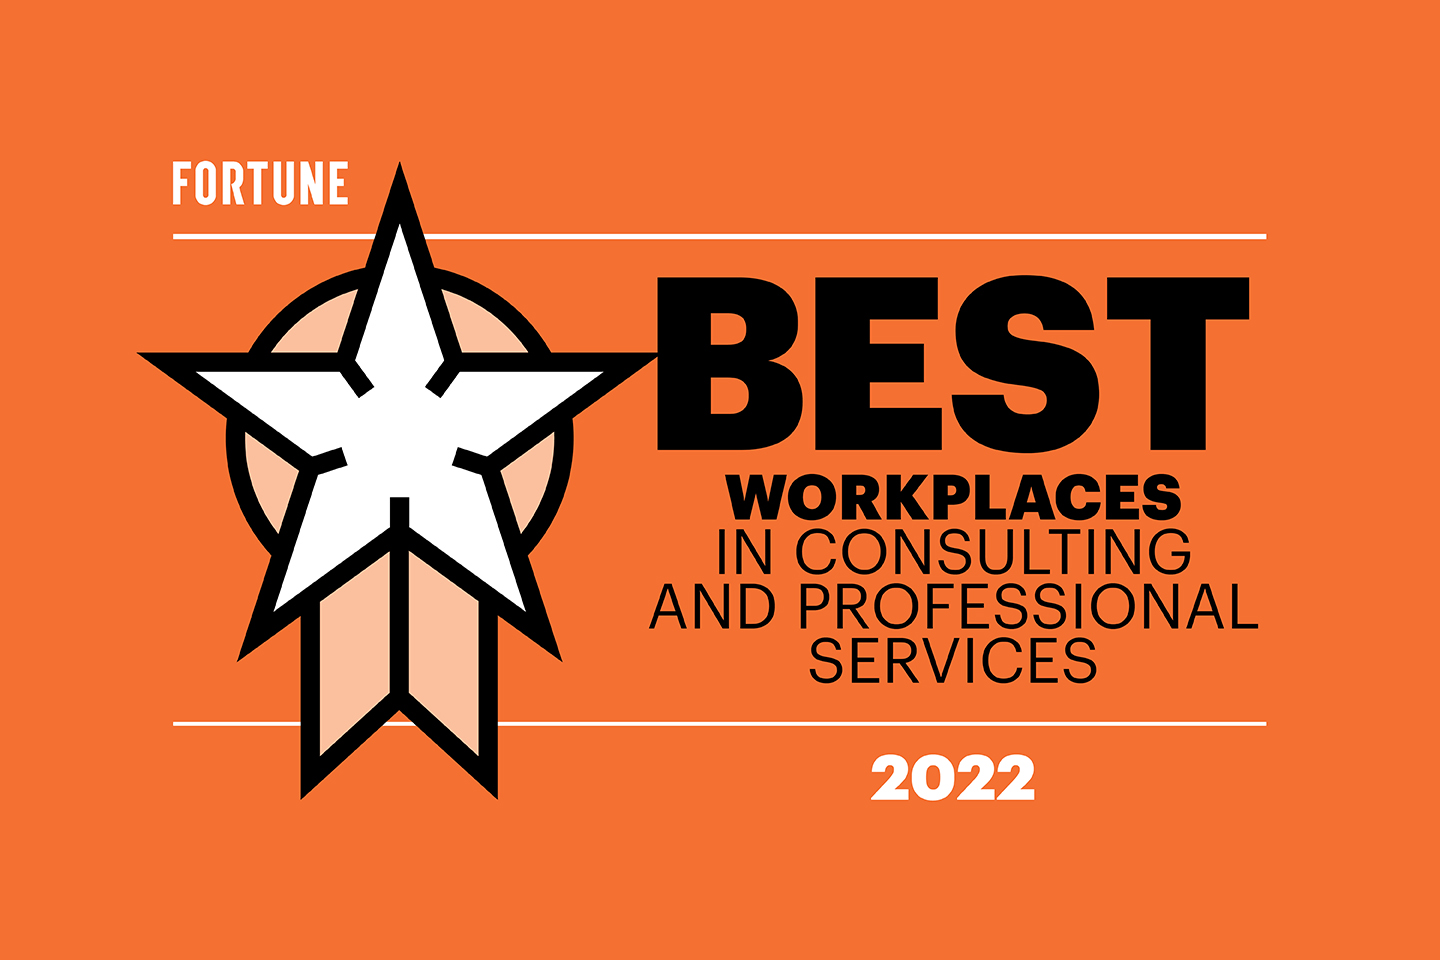 25 Best Large Workplaces in Consulting and Professional Services